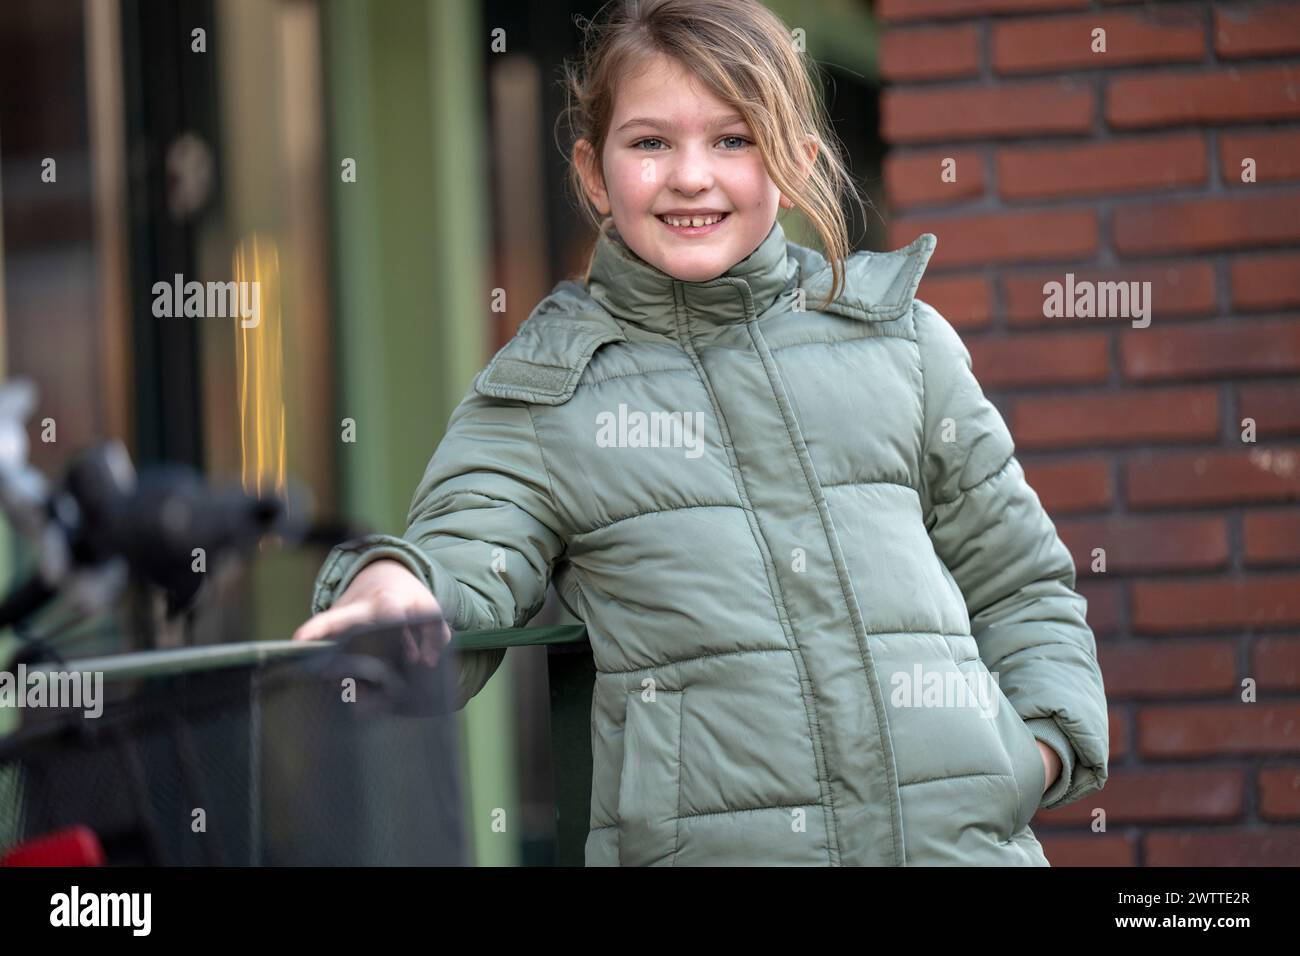 A young girl smiles warmly outdoors in a cozy green jacket Stock Photo